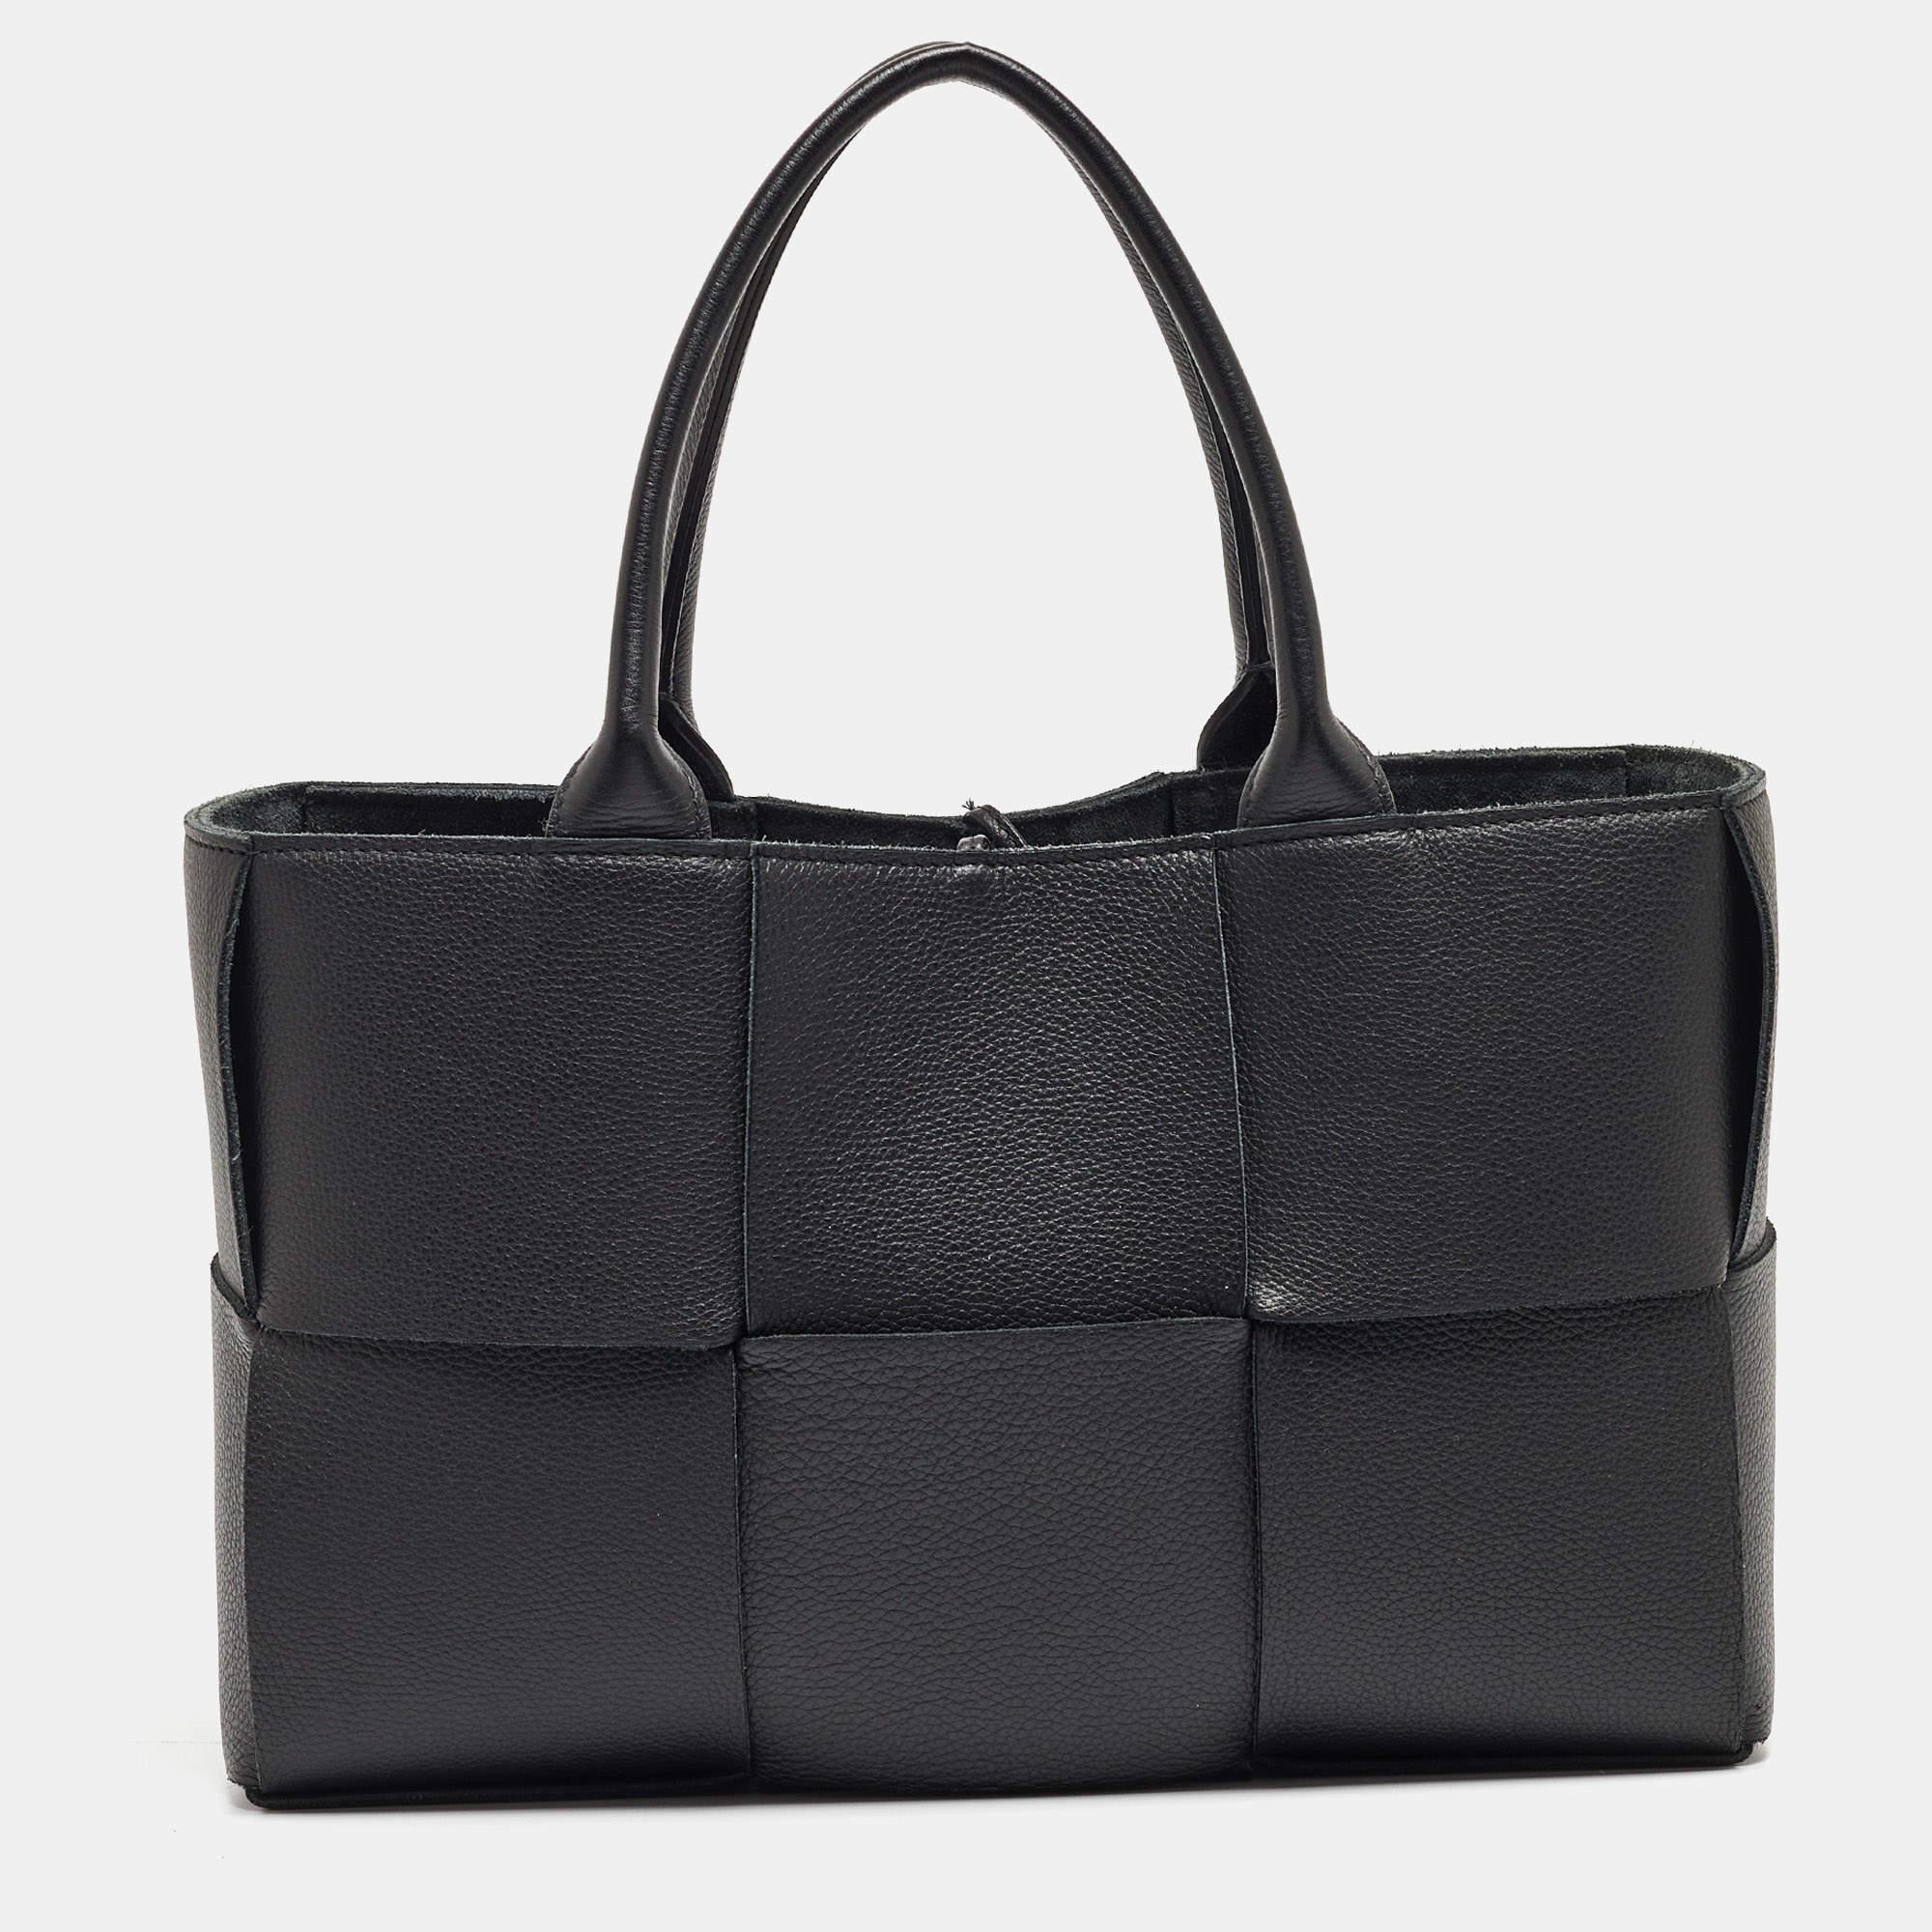 Know to create stylish, sophisticated, and timeless designs, this is a brand worth investing in. The bags that come from this label's atelier are exquisite. This tote bag is no different. It has been made from quality materials and comes with an